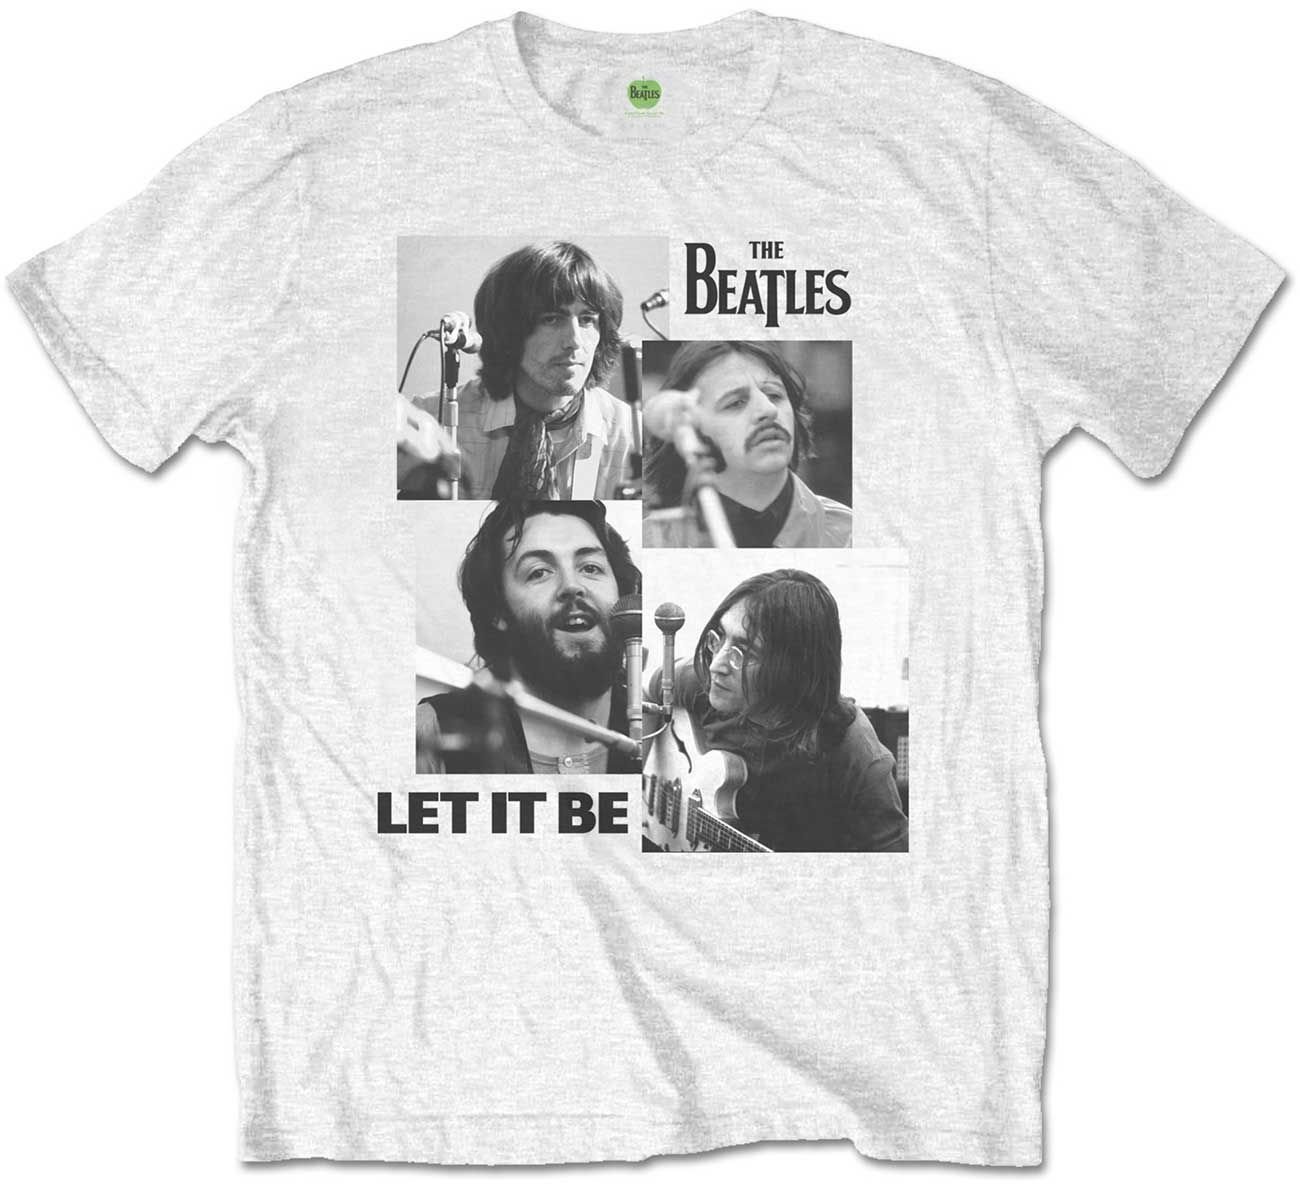 T-Shirt The Beatles T-Shirt Let it Be Male White 11 - 12 Y